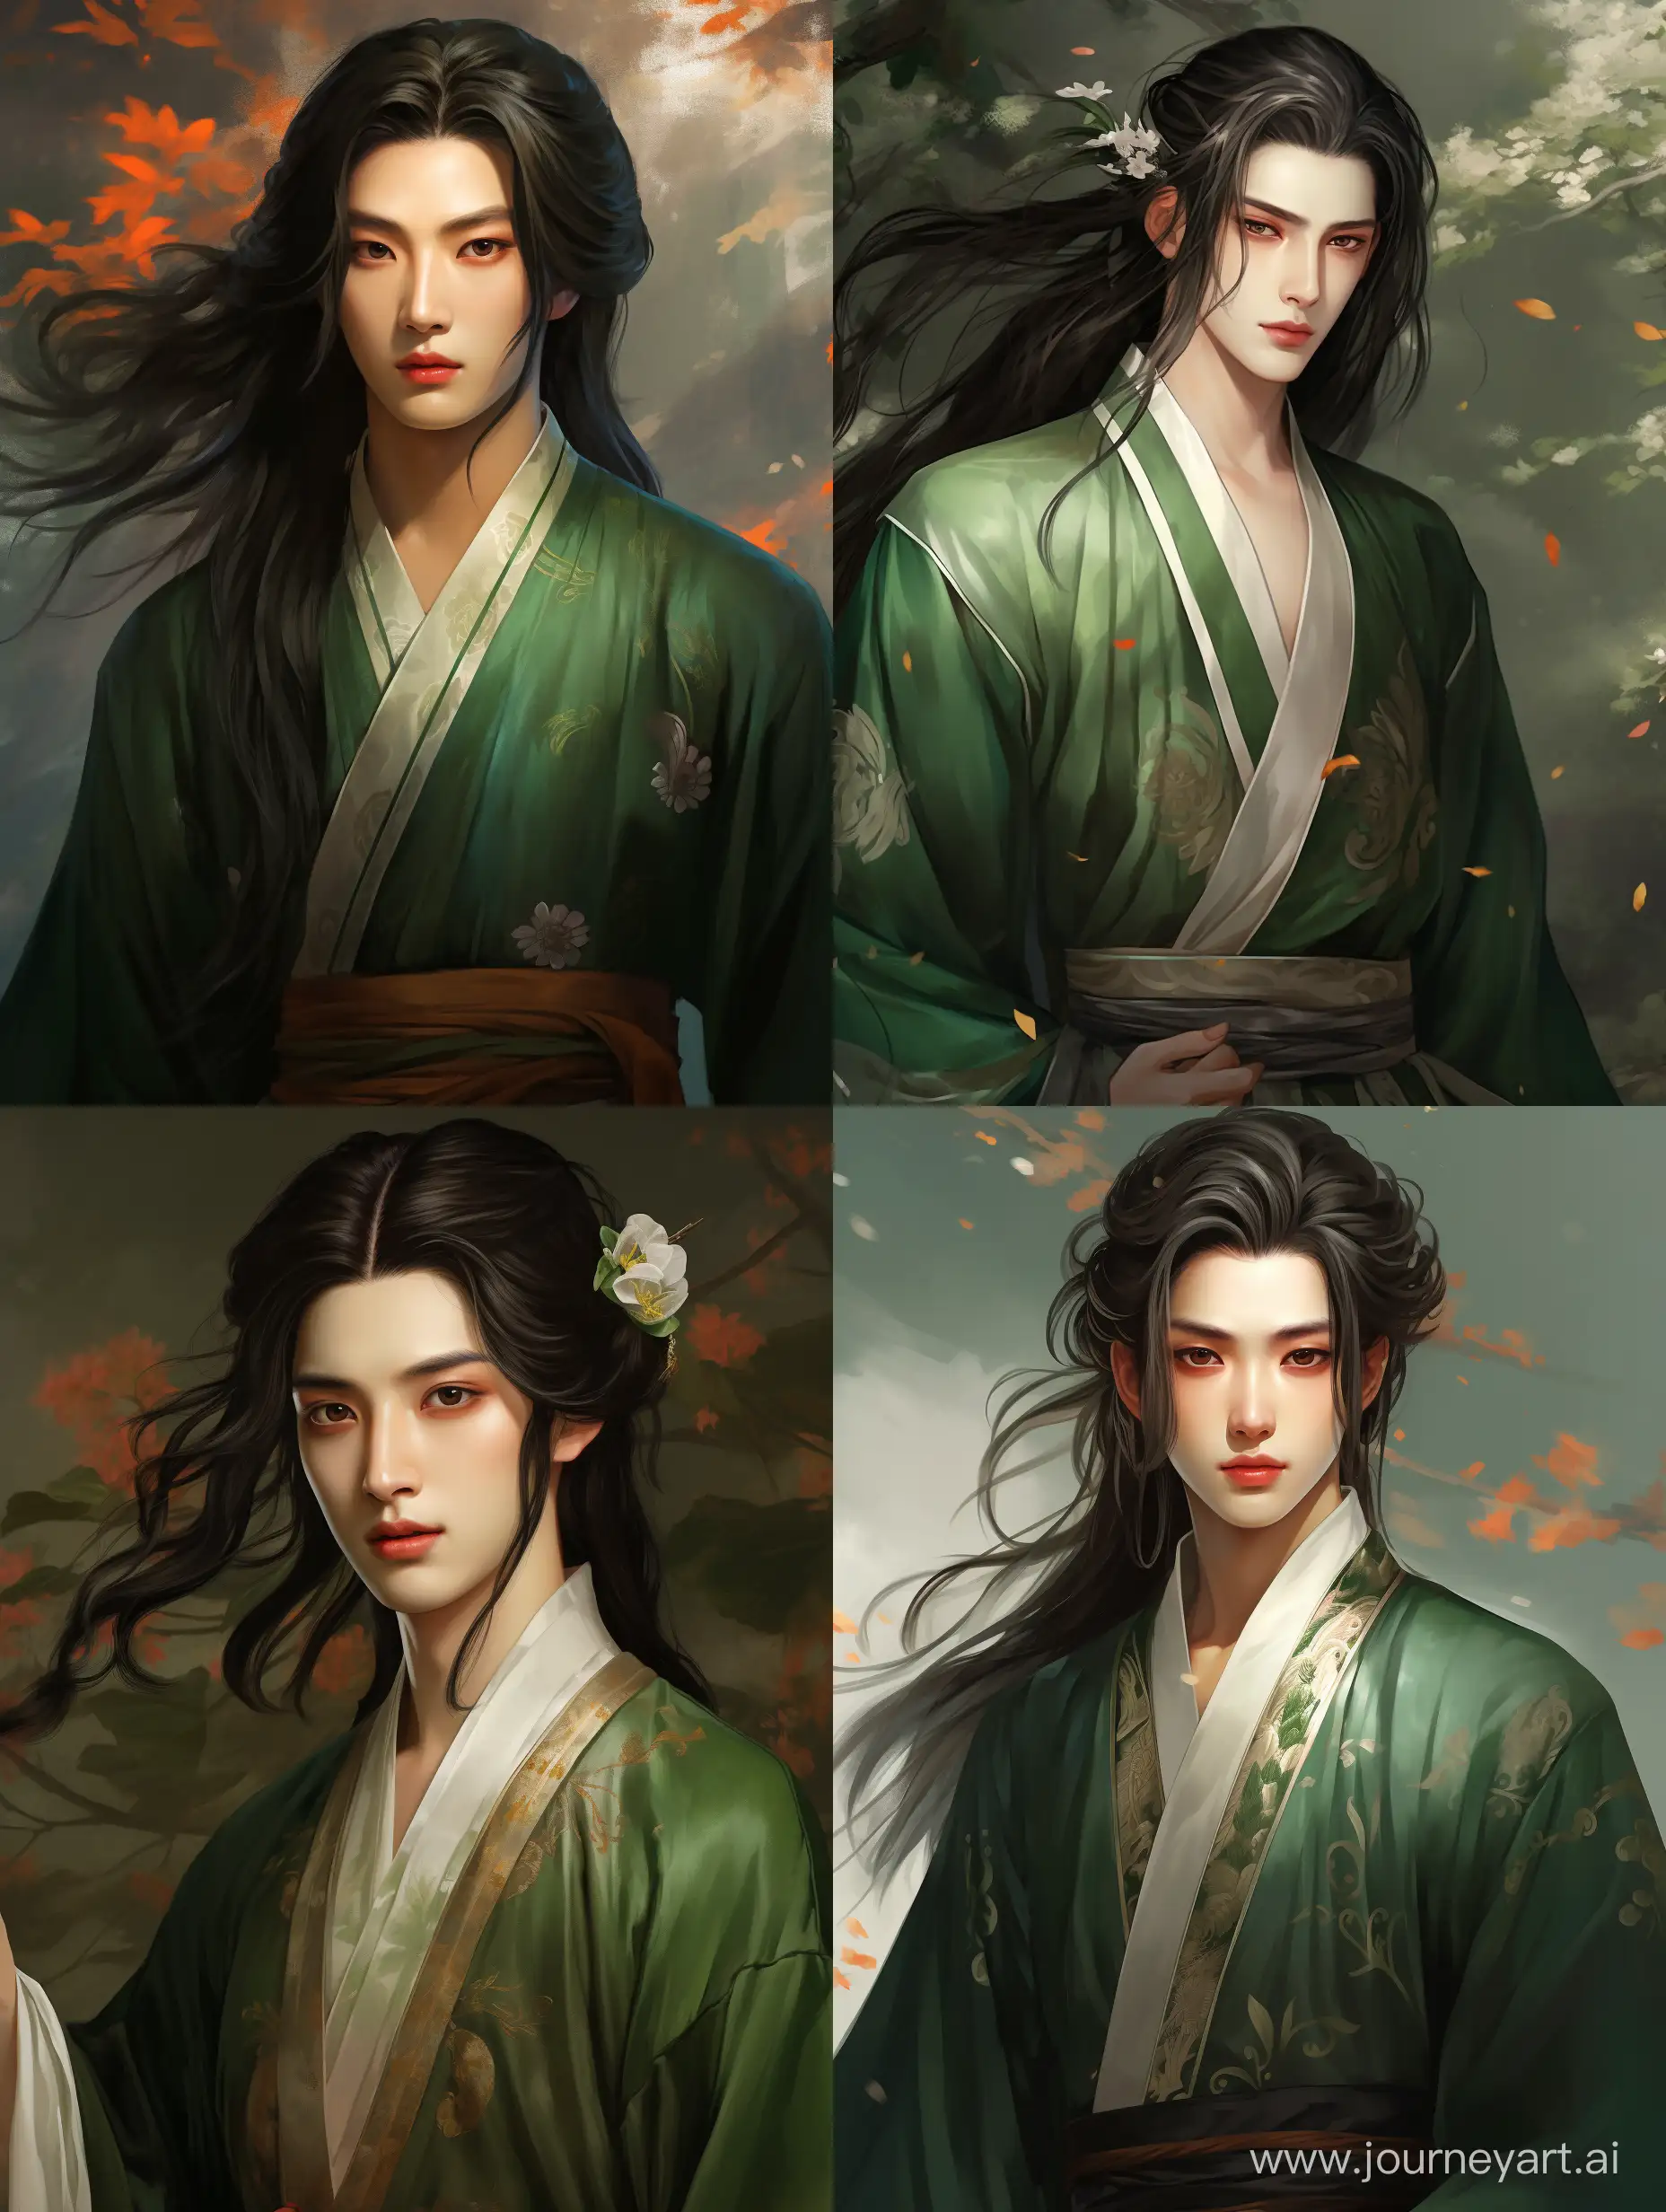 Elegant-20YearOld-Man-in-Ancient-Chinese-Attire-with-Long-Black-Hair